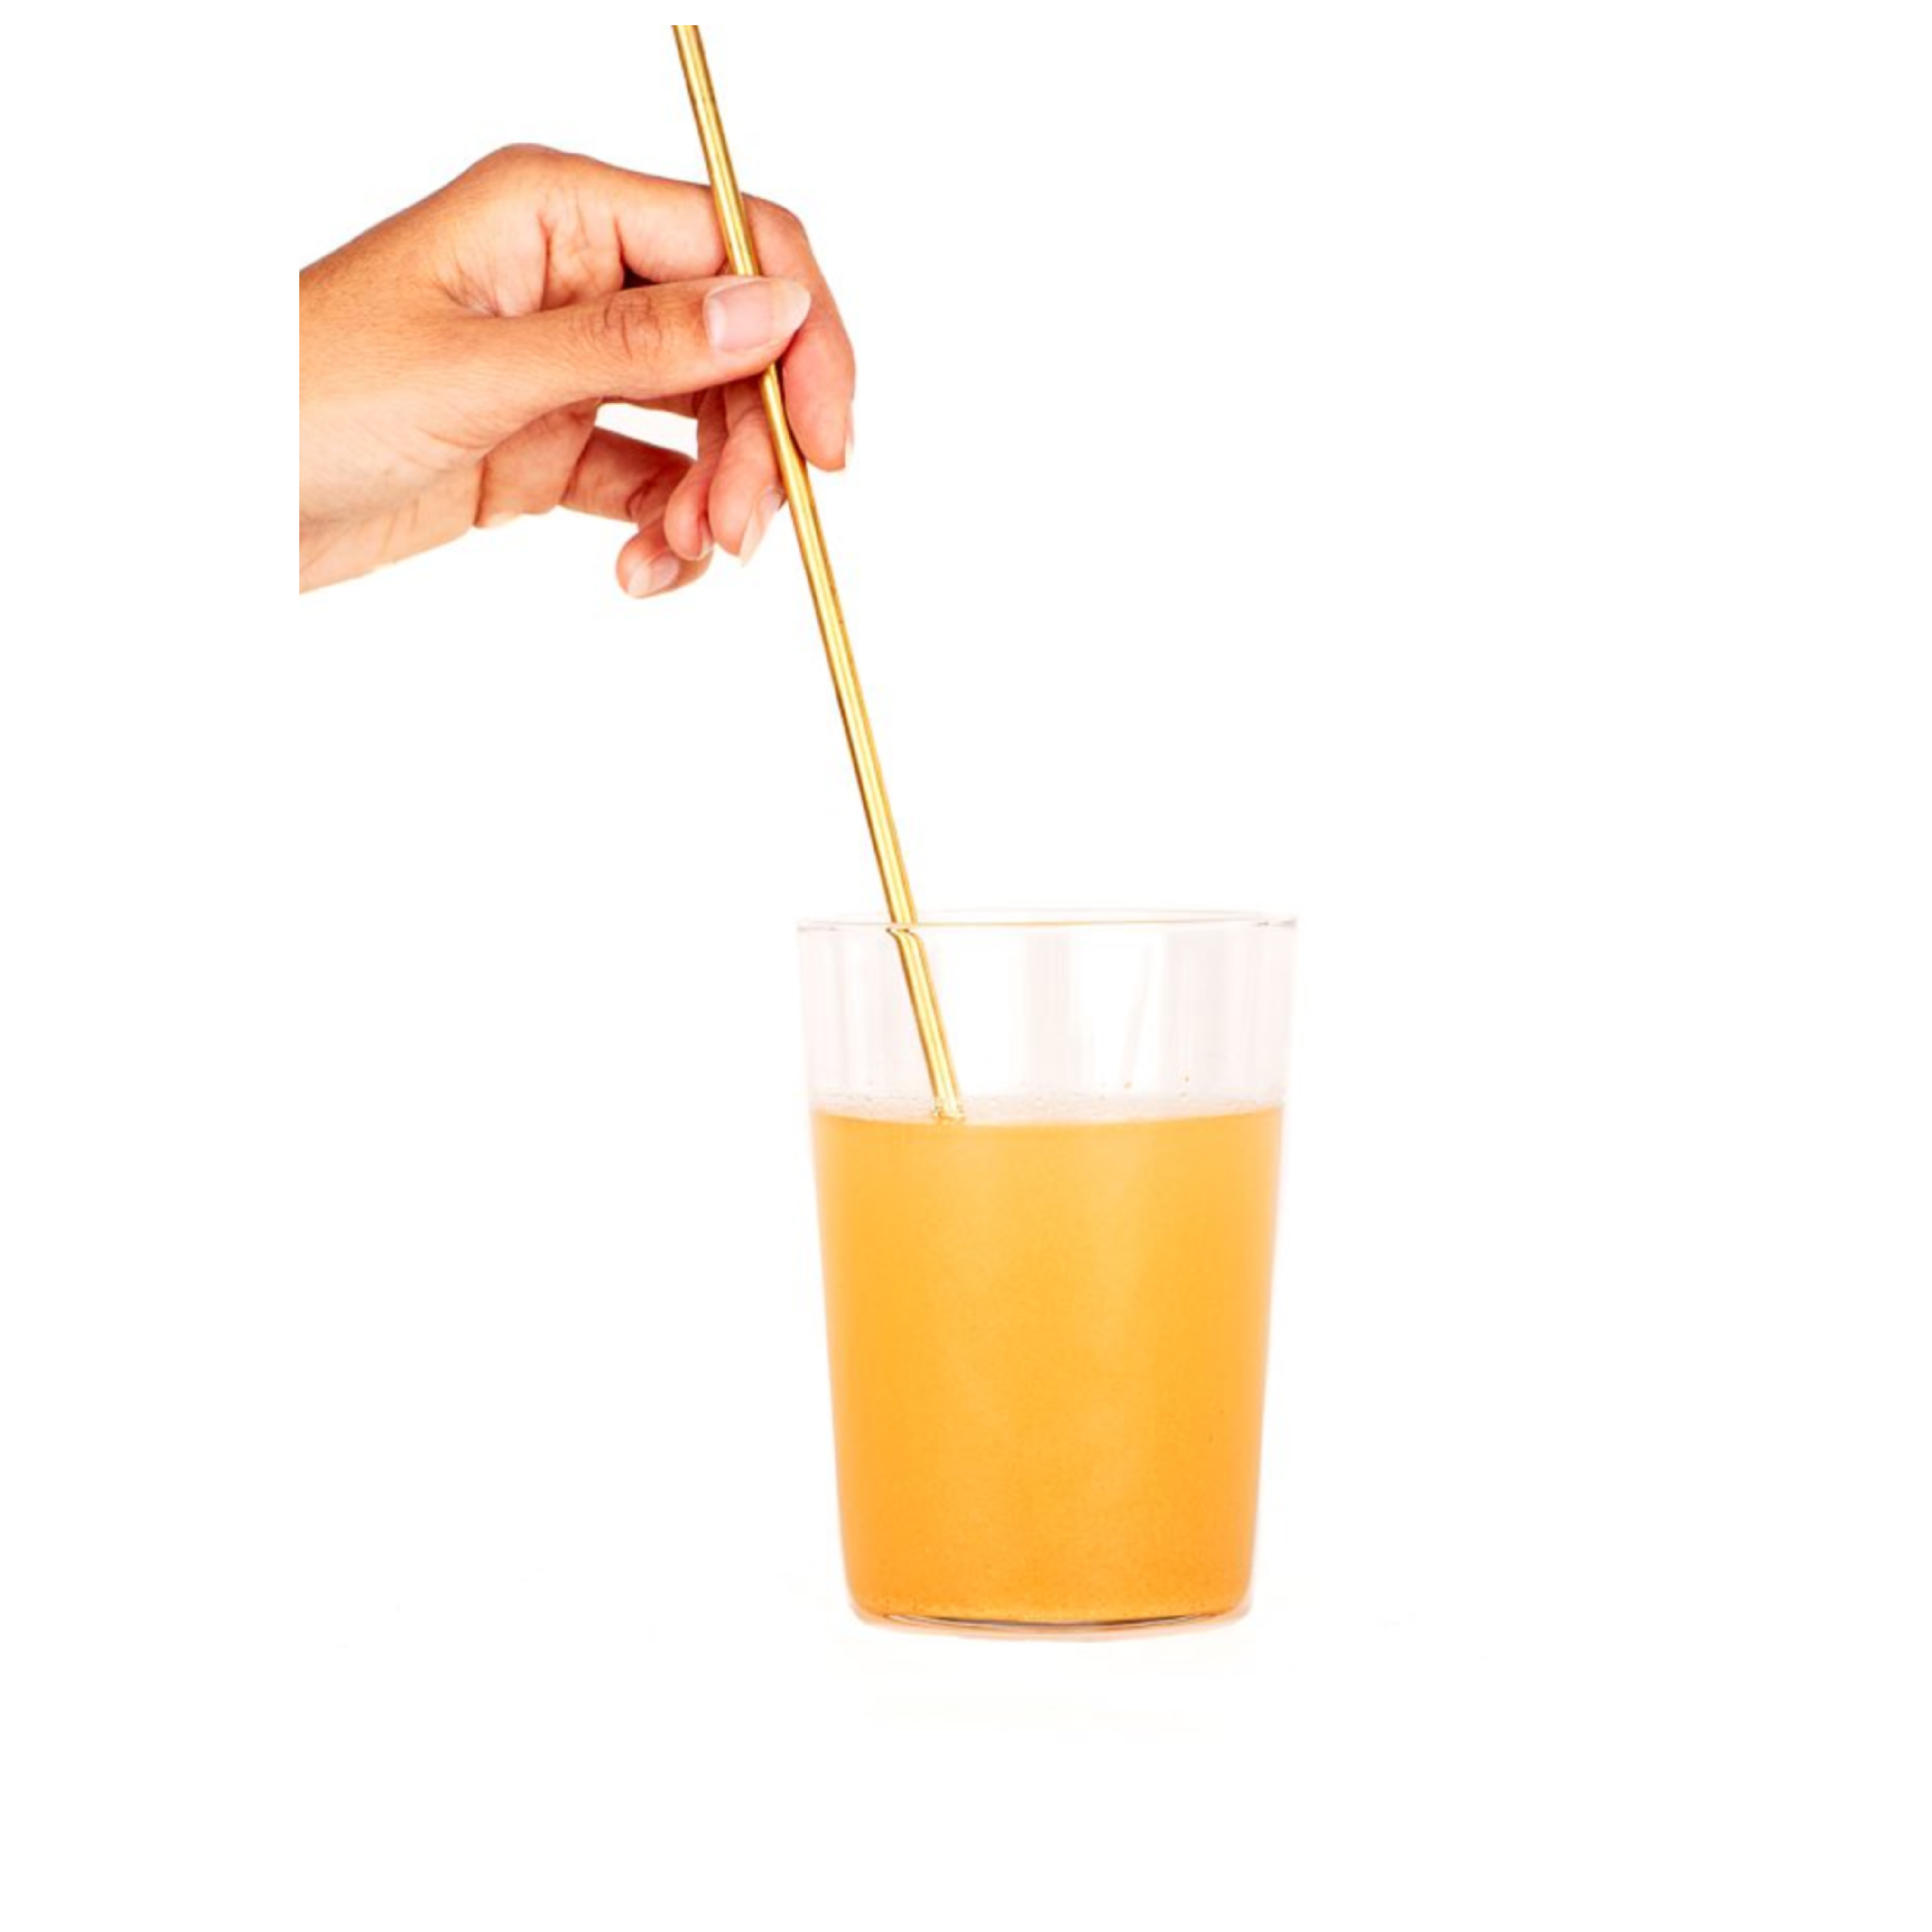 turmeric extract in a glass being hand stirred with a stick